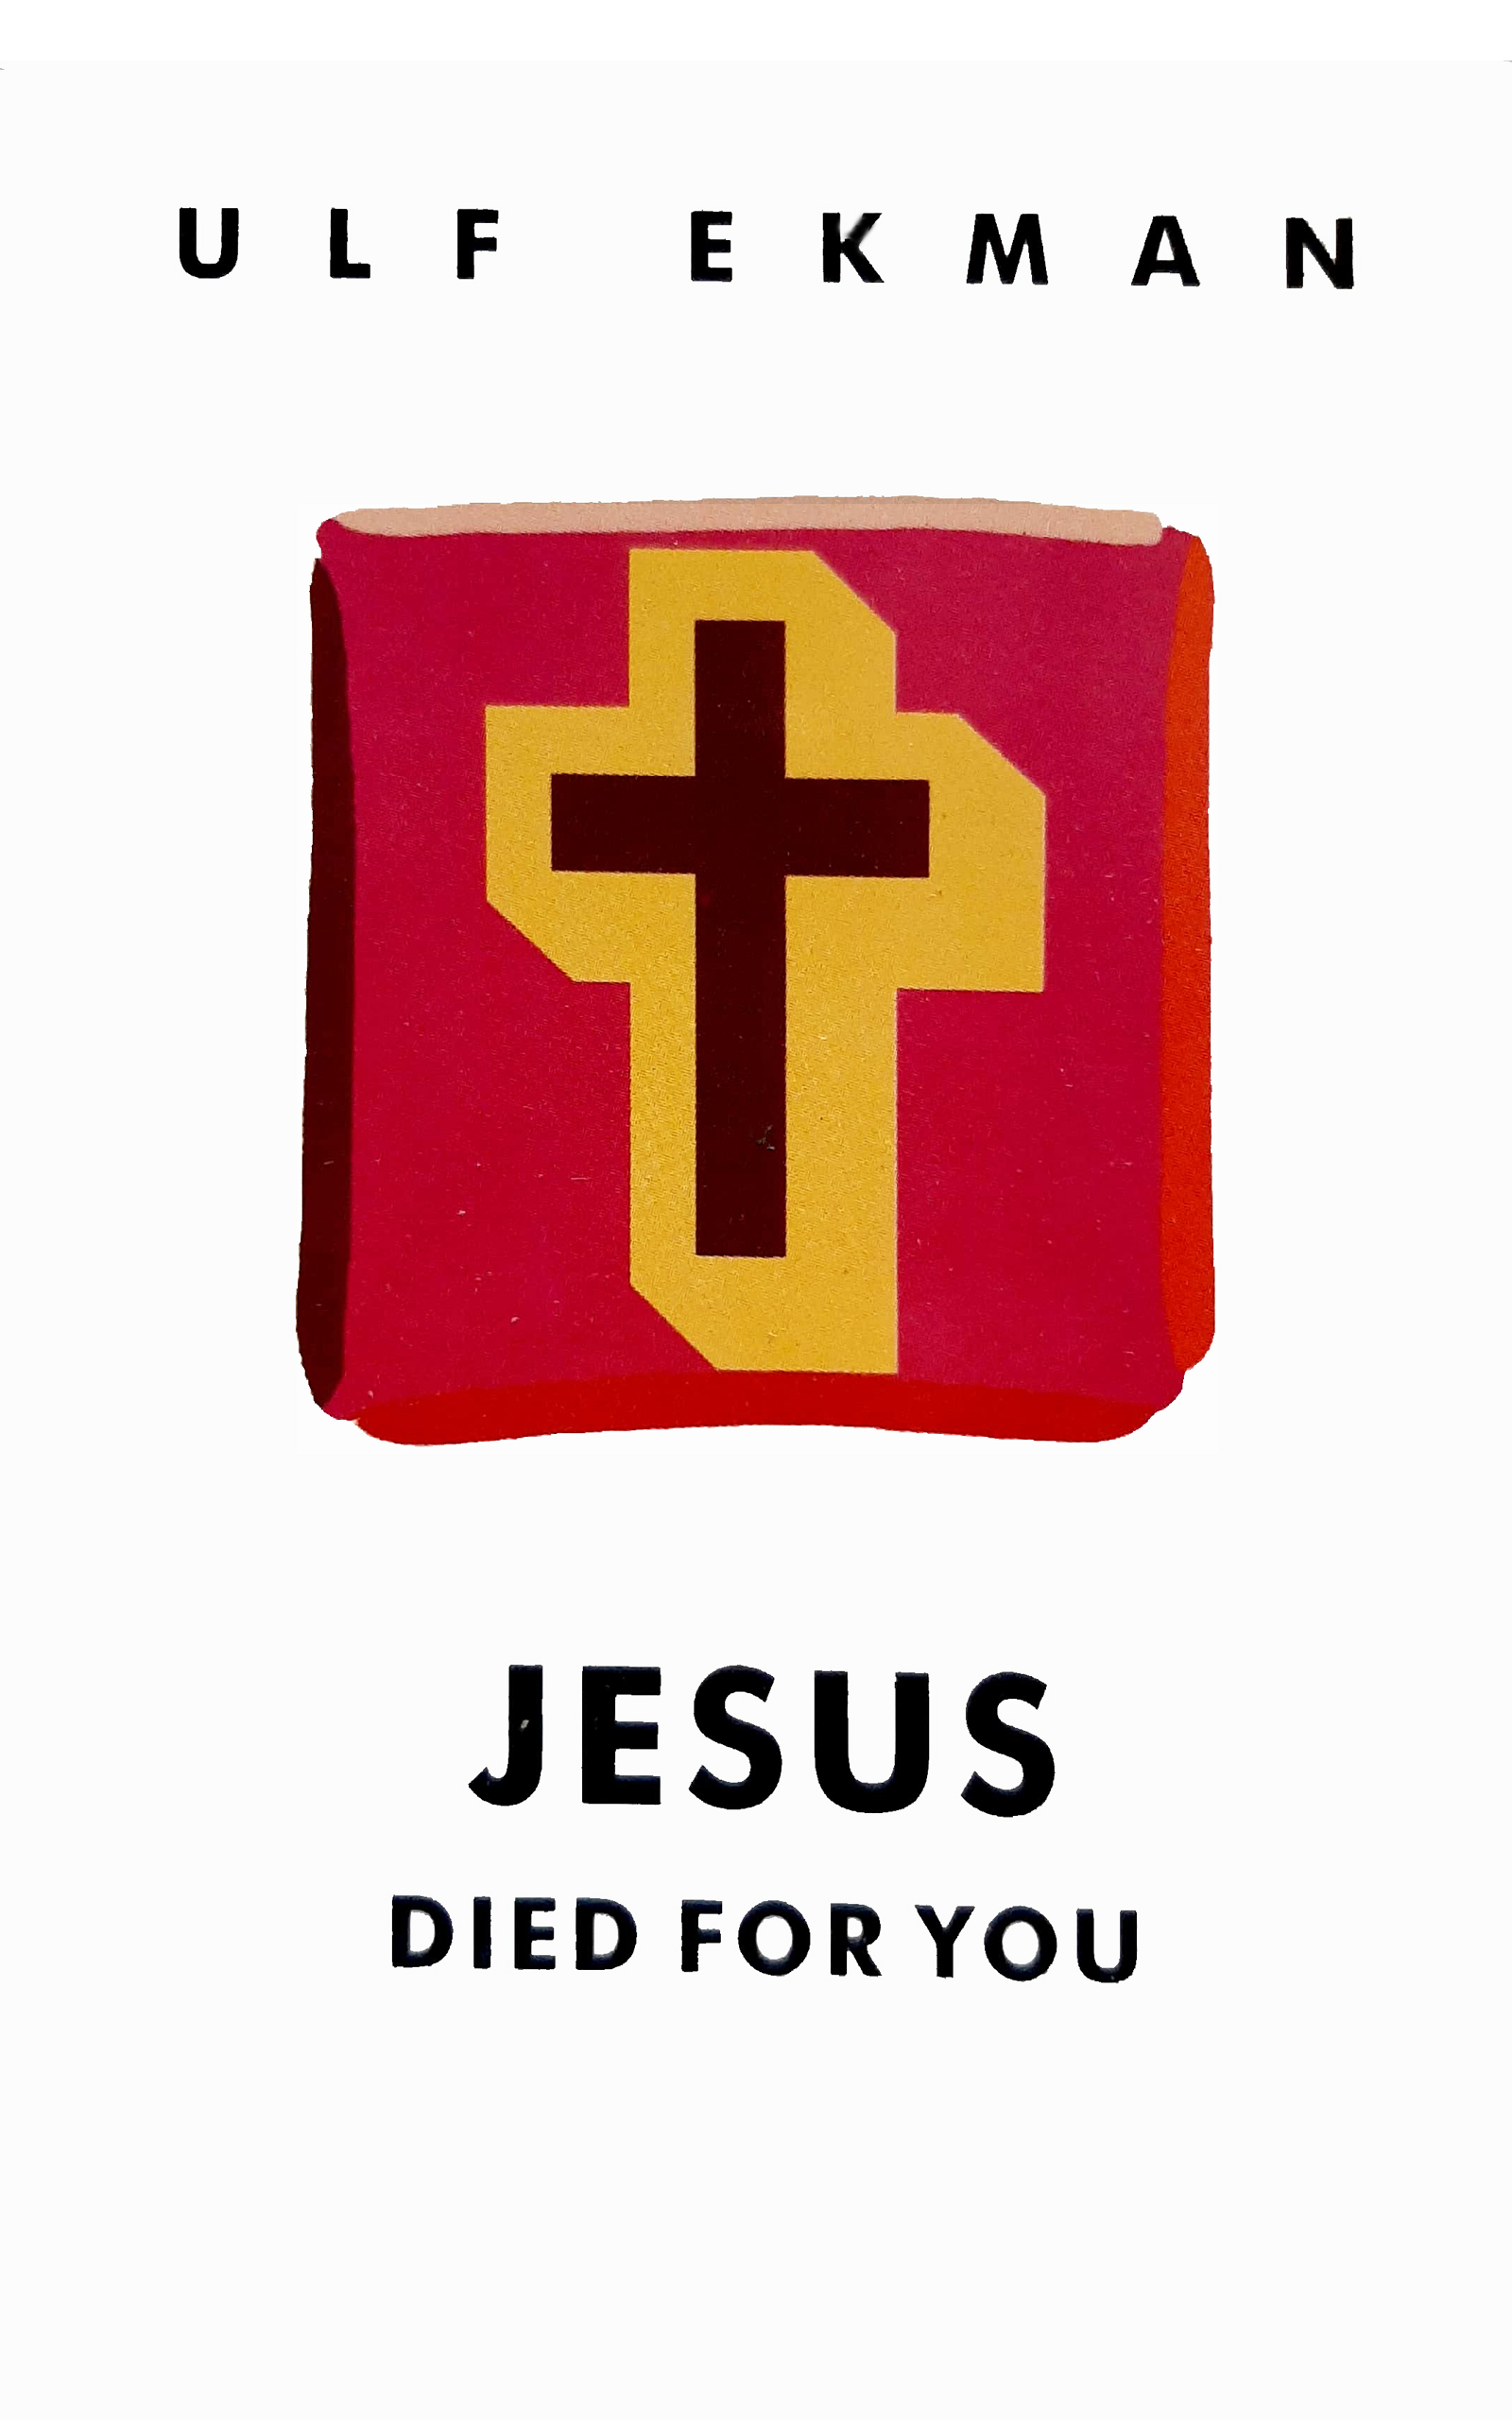 ESUS died for you Ulf Ekman